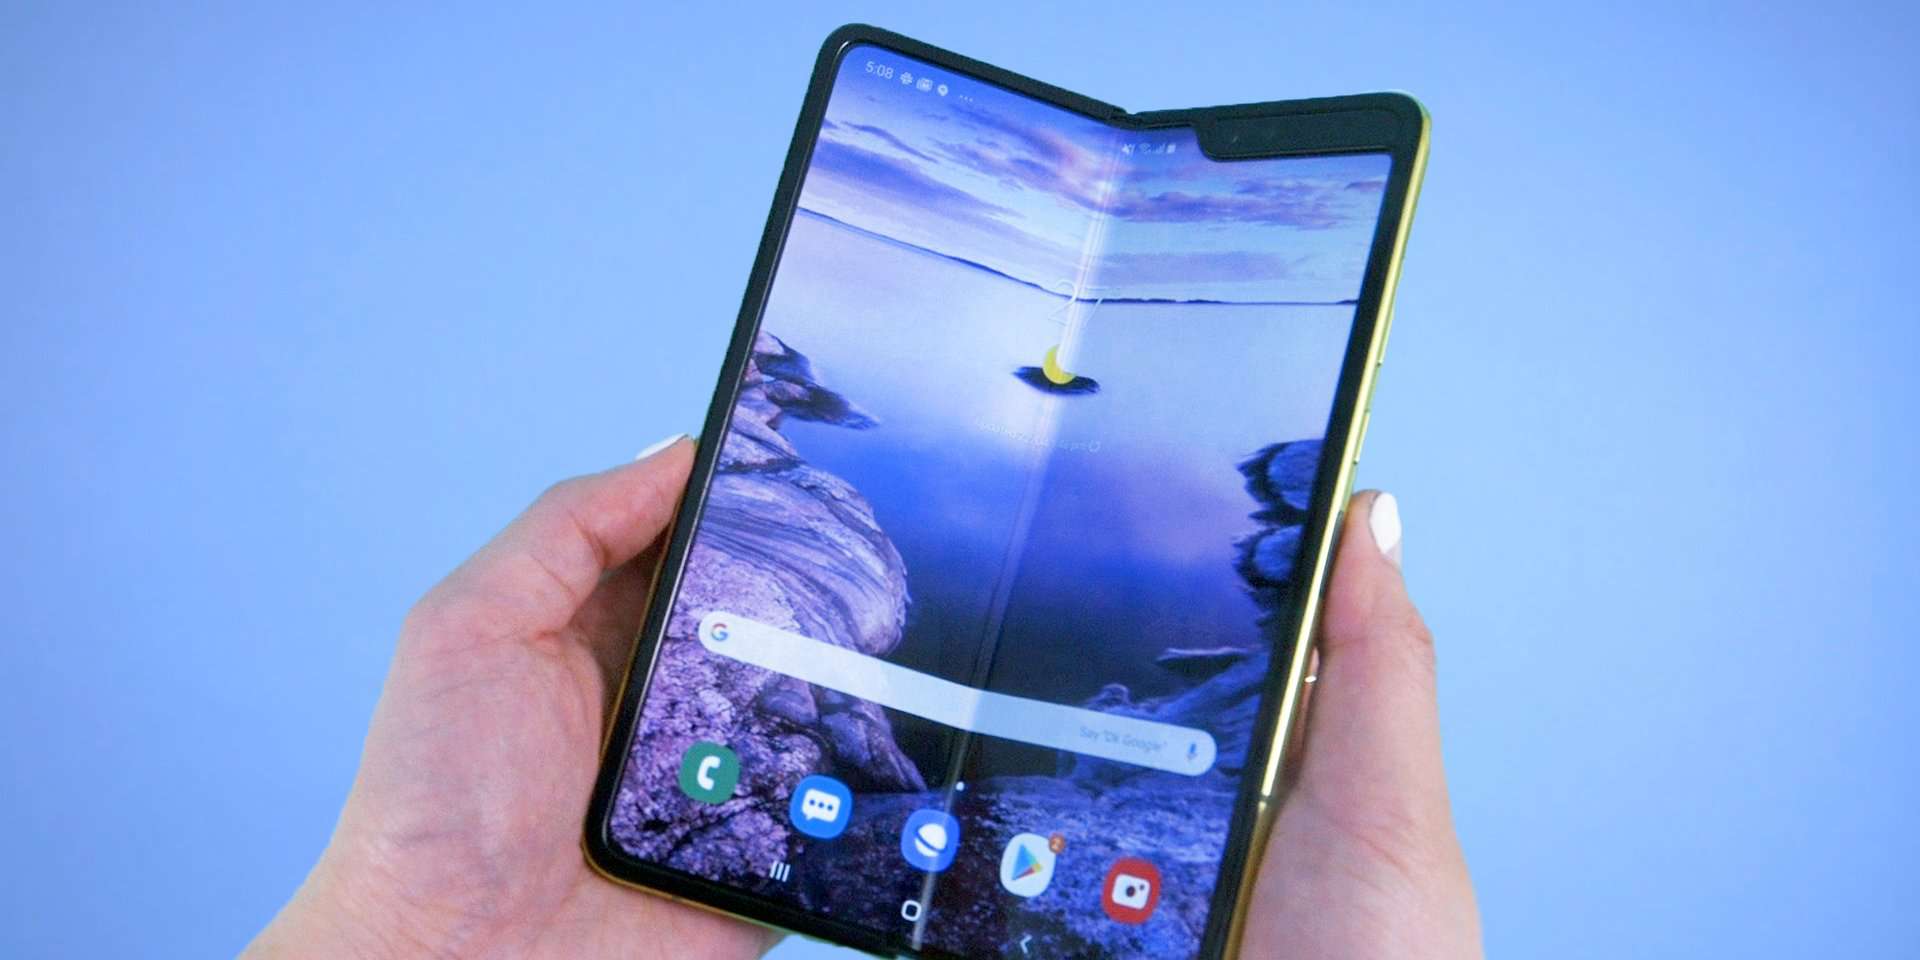 Taboola Ad Example 49359 - I Tried The $1,980 Samsung Galaxy Fold And It's Impressive For A First-generation Foldable Phone, Though Far From Perfect